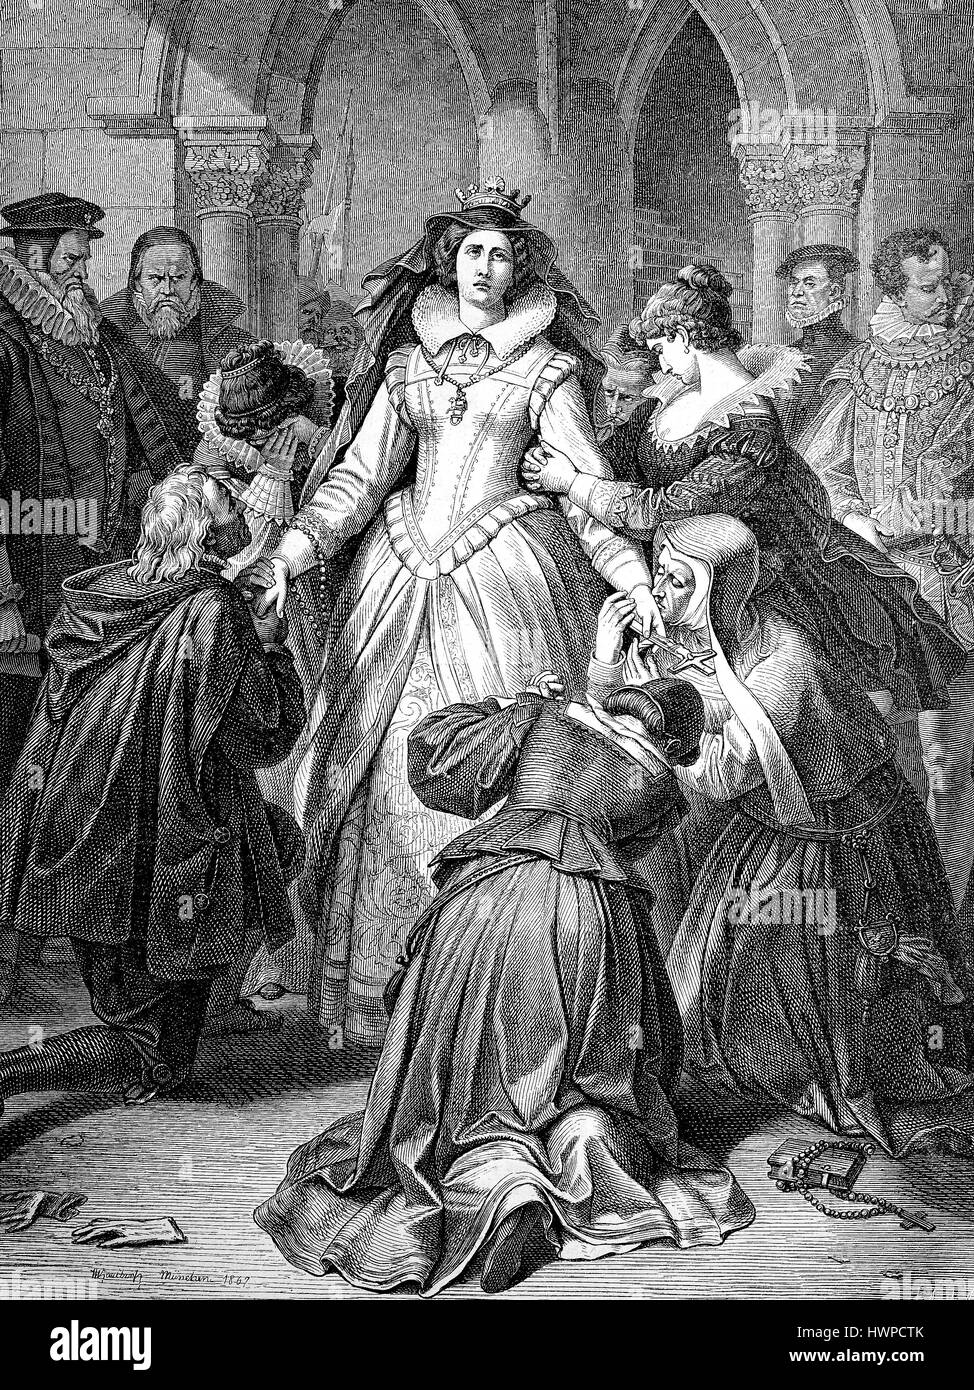 Maria Stuart, saying goodbye to their followers on the way to the execution. Maria Stuart, 1542-1587, born as Mary Stewart, was Queen of Scots by the 14 December 1542 until July 24, 1567, as Maria I, Reproduction of an original woodcut from the year 1882, digital improved Stock Photo